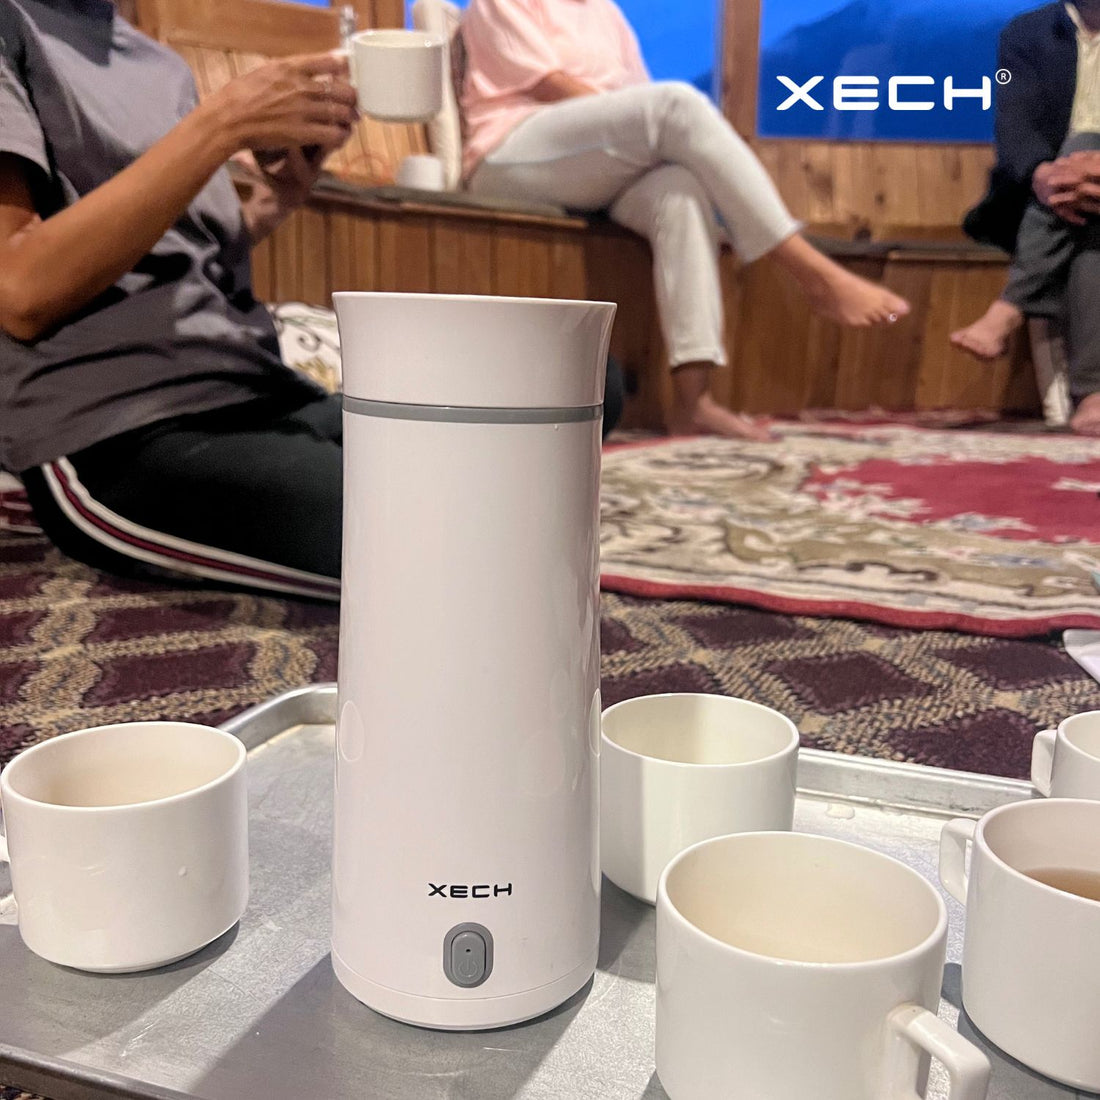 XECH Hydroboil Portable Kettle For Travelling New Innovative Bottle that can boil Water